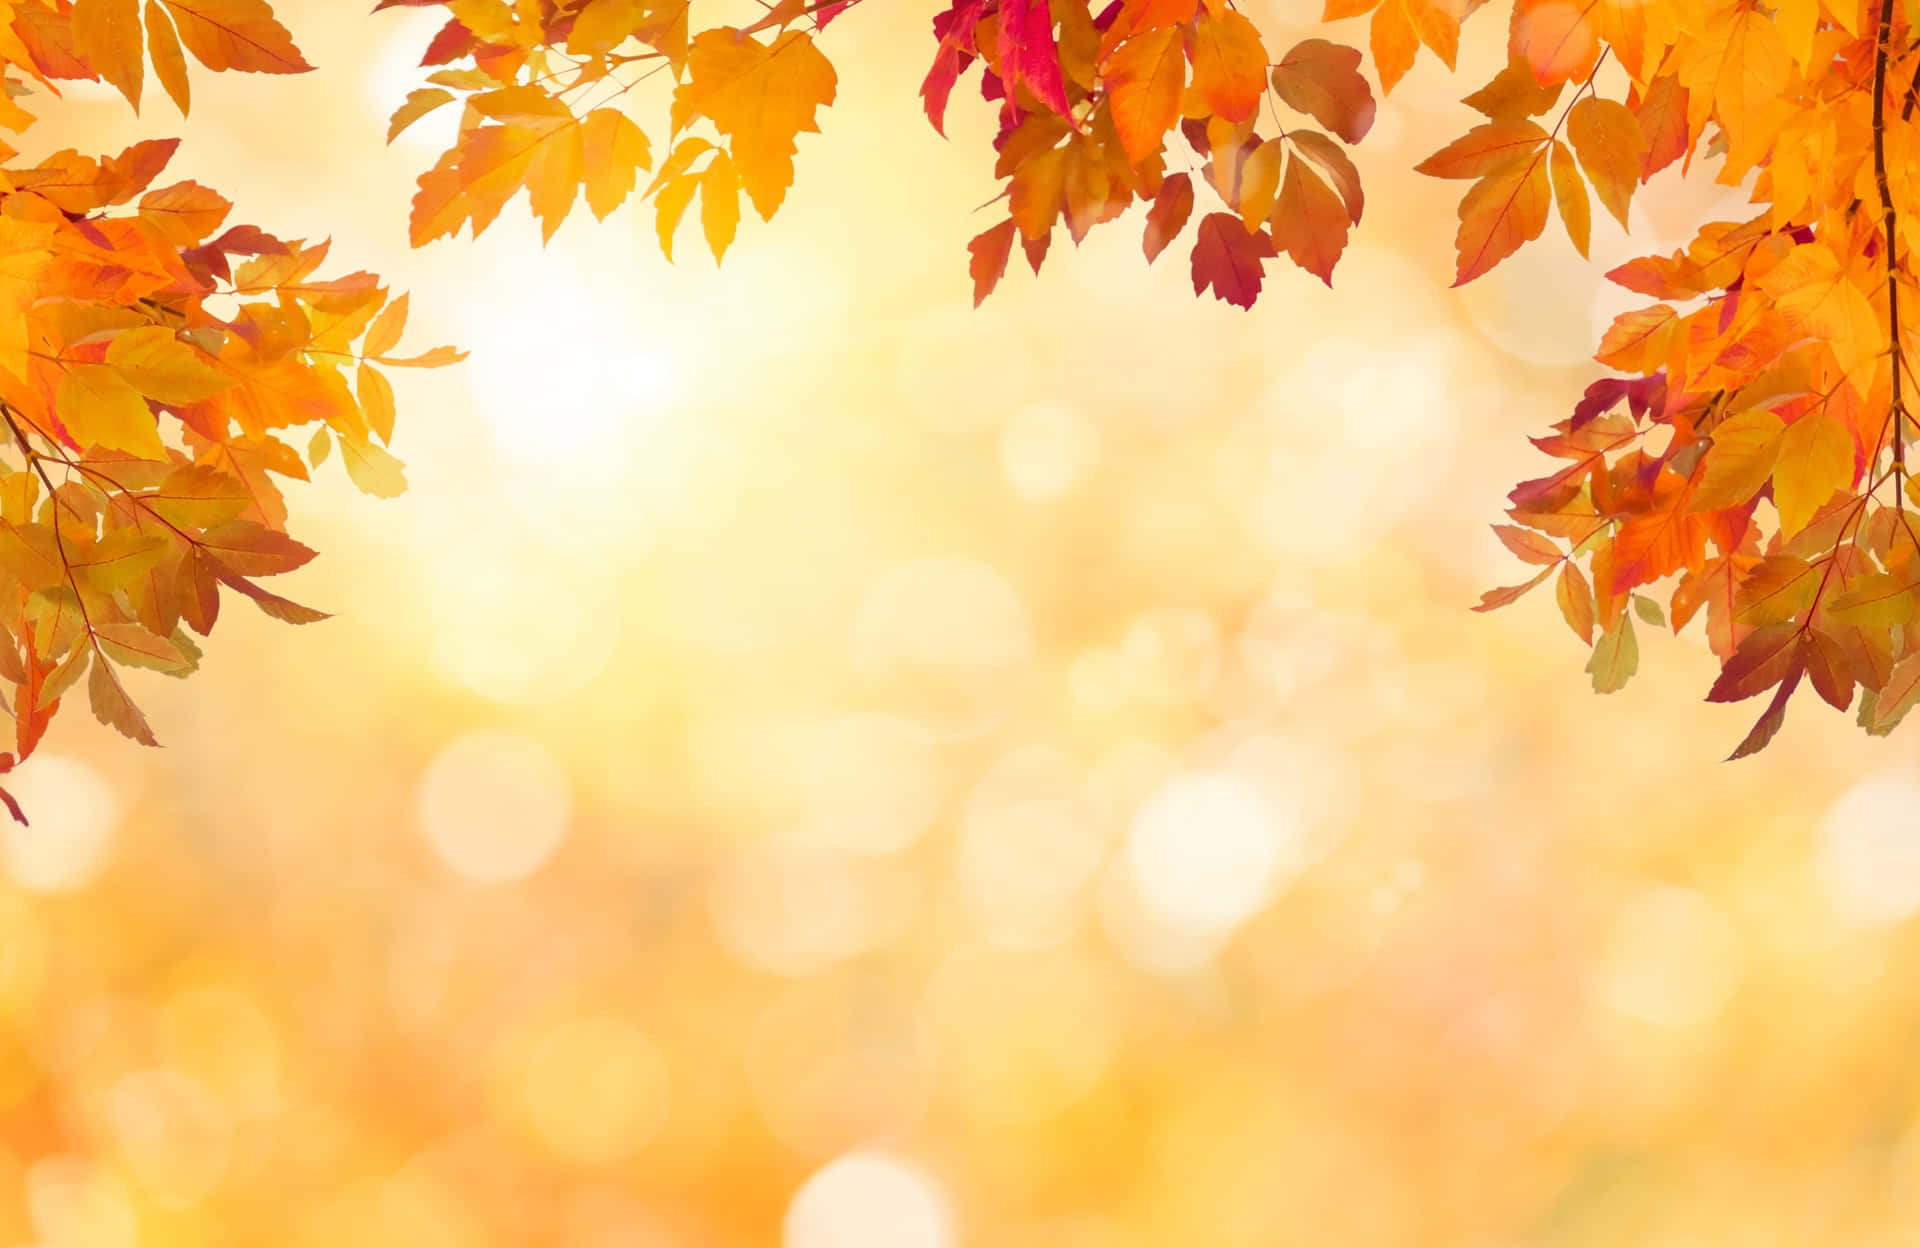 Get the Best of Fall with this Beautiful Background